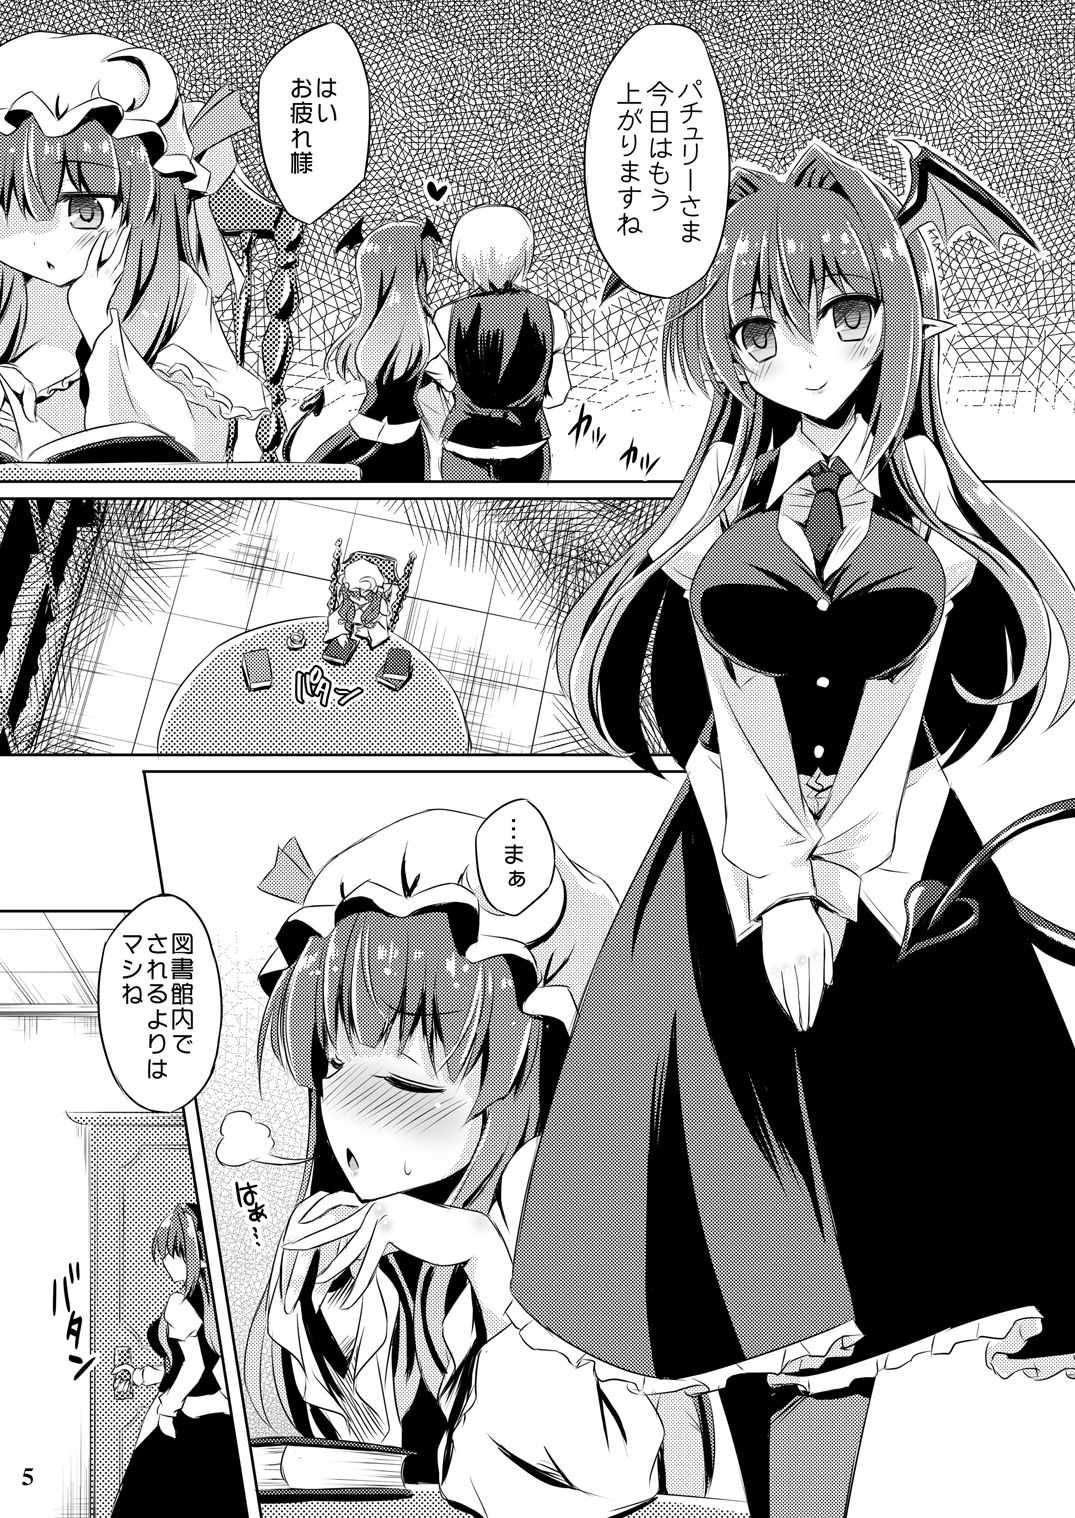 [Reverse Noise (Yamu)] Juusha no Tame no Nocturne (Touhou Project) [Digital] page 4 full